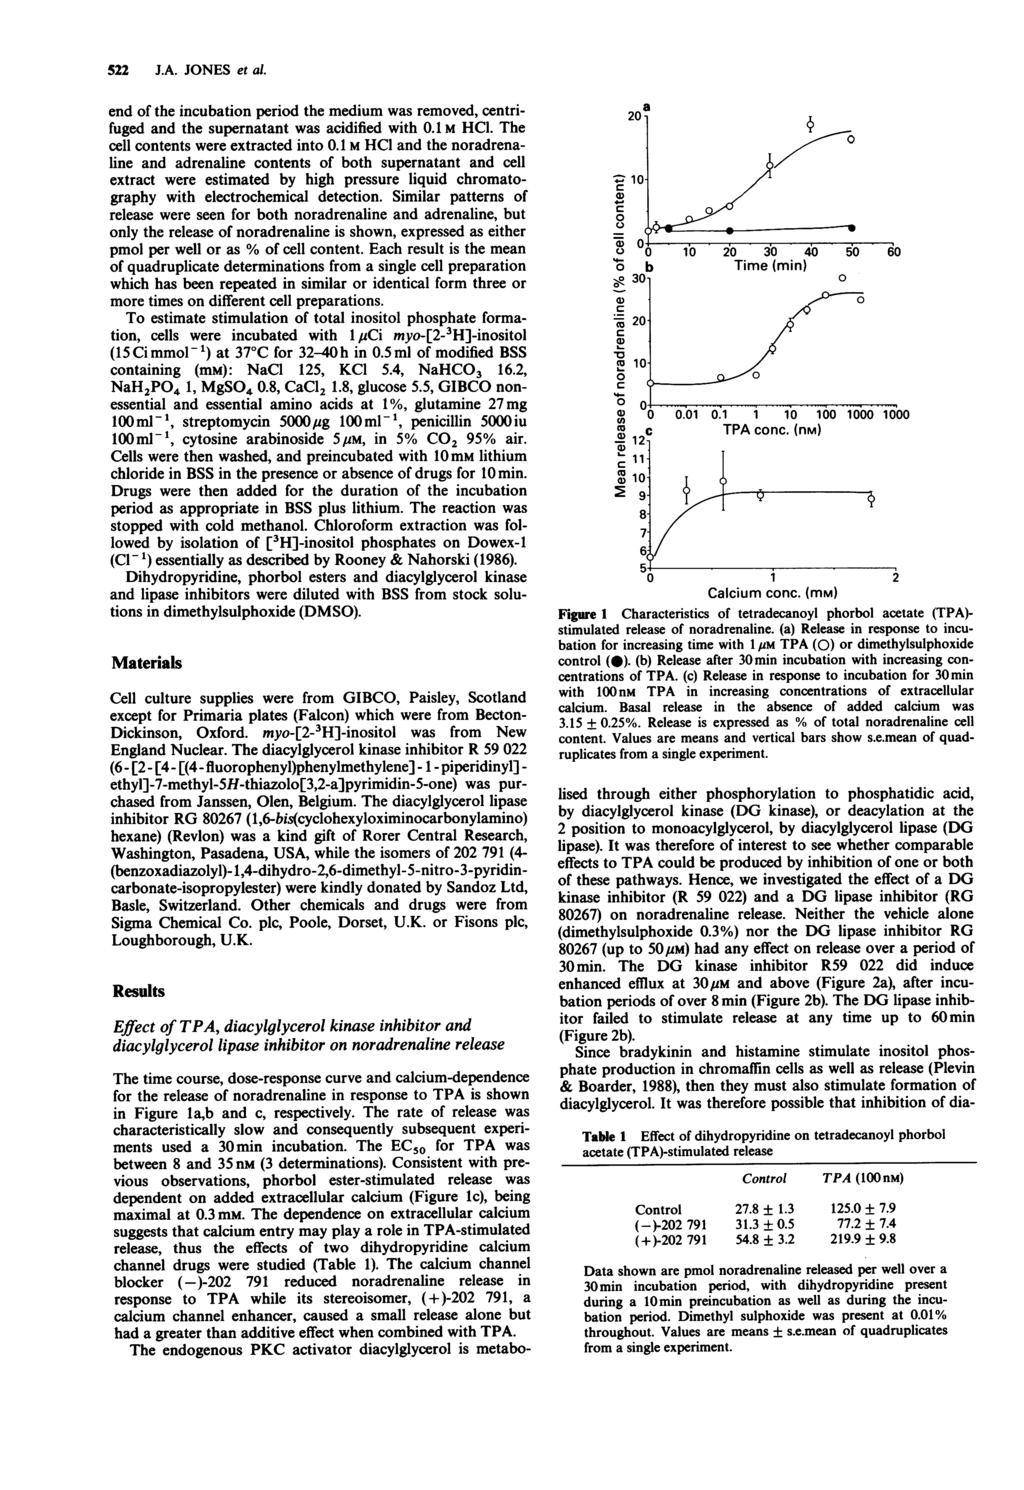 522 J.A. JONES et al. end of the inubation period the medium was removed, entrifuged and the supernatant was aidified with.1 M HCI. The ell ontents were extrated into.